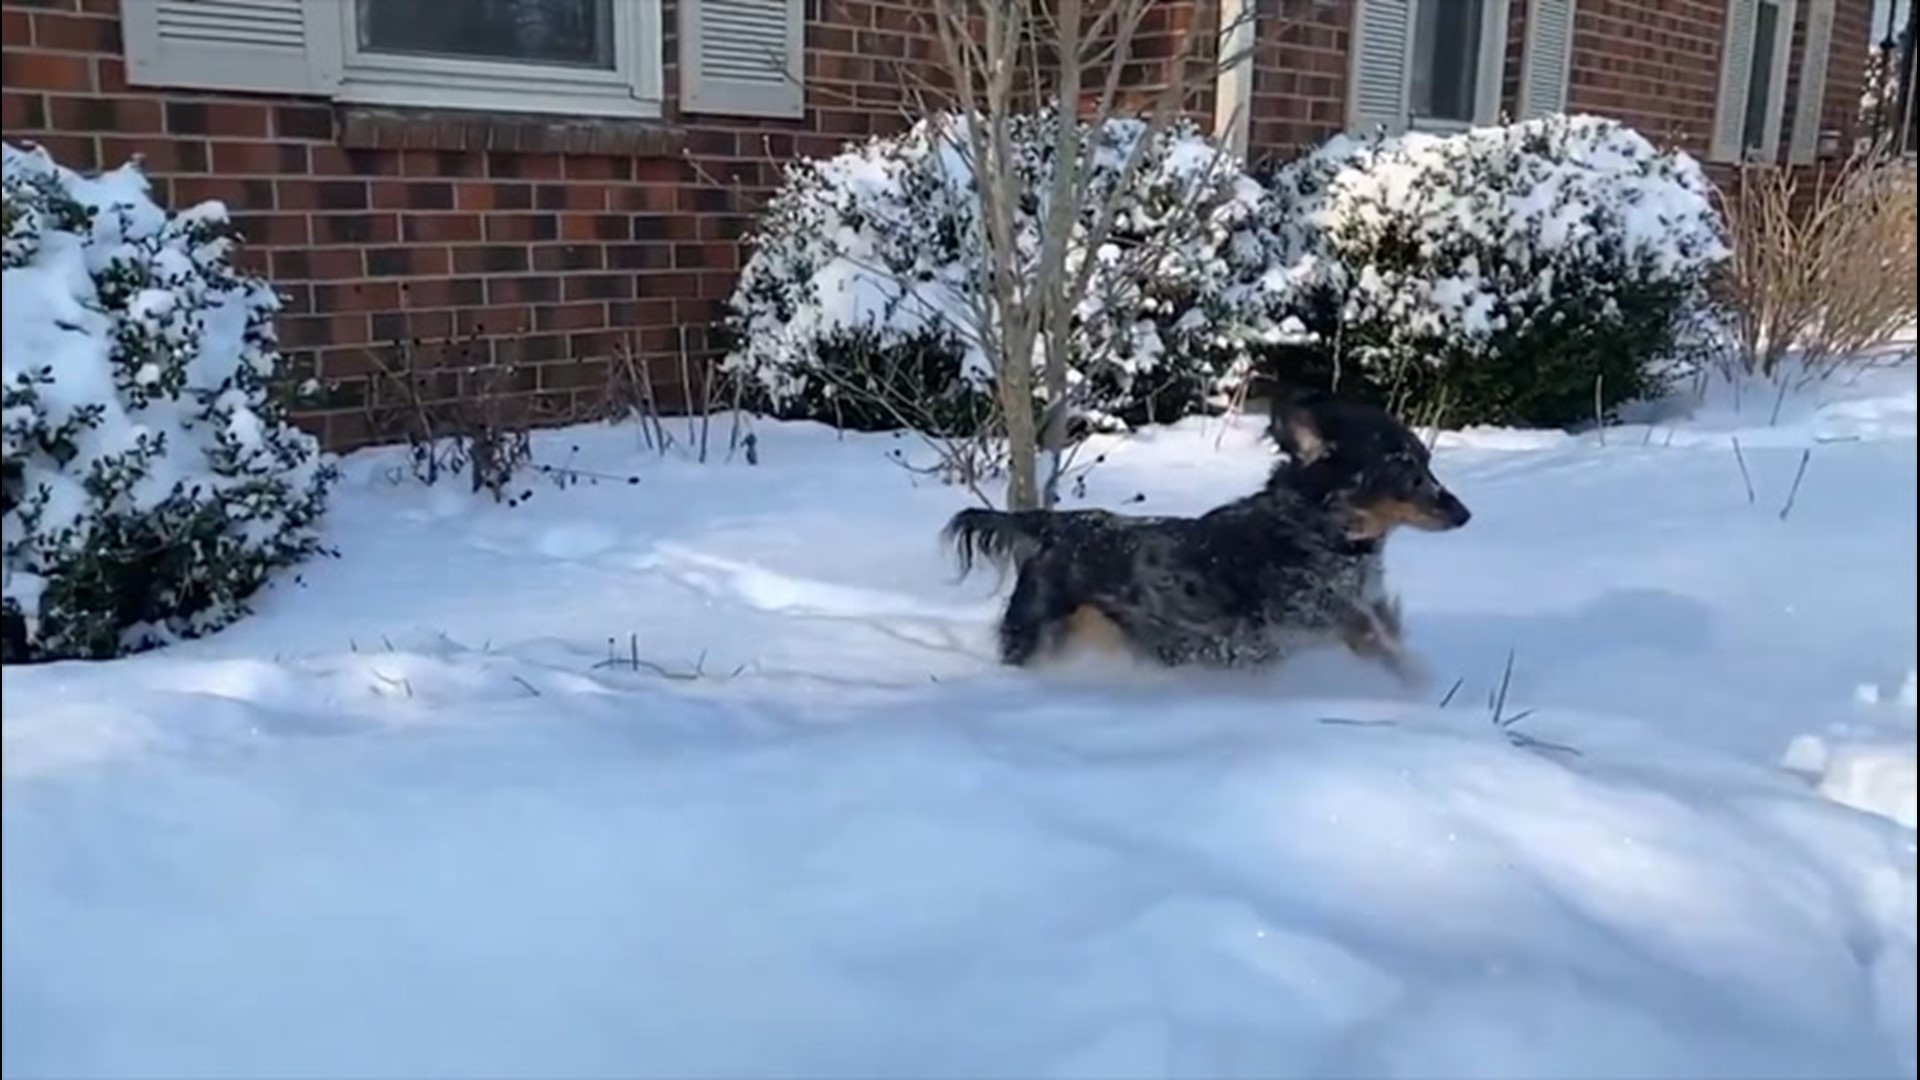 Dogs and their owners across the U.S. took full advantage of snowy days in mid-February.